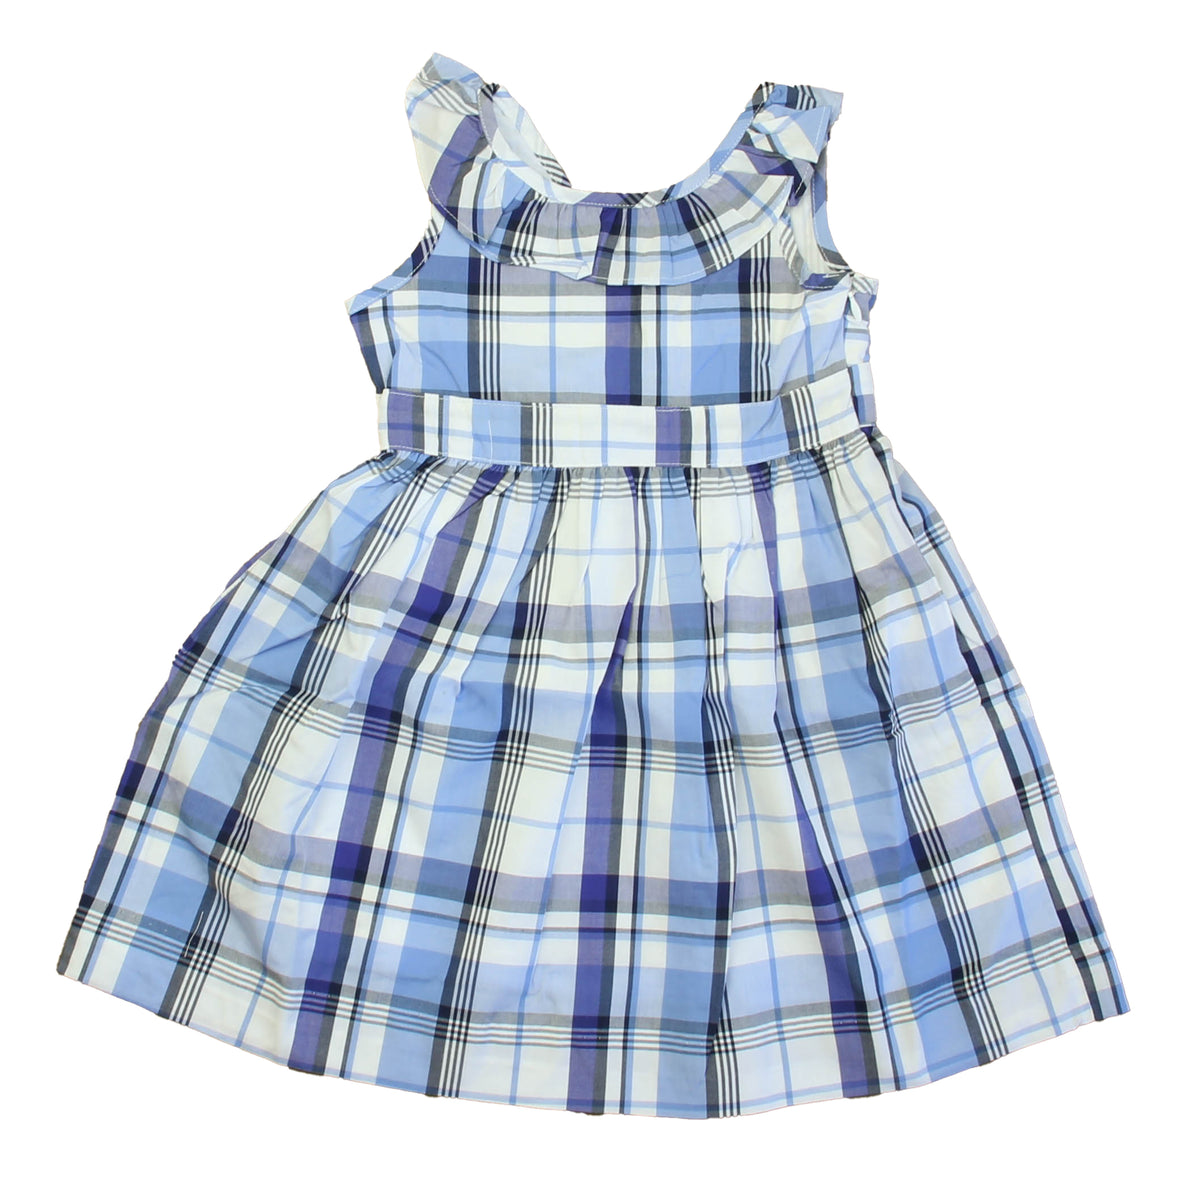 New with Tags: Blue Plaid Dress size: 2-5T -- FINAL SALE